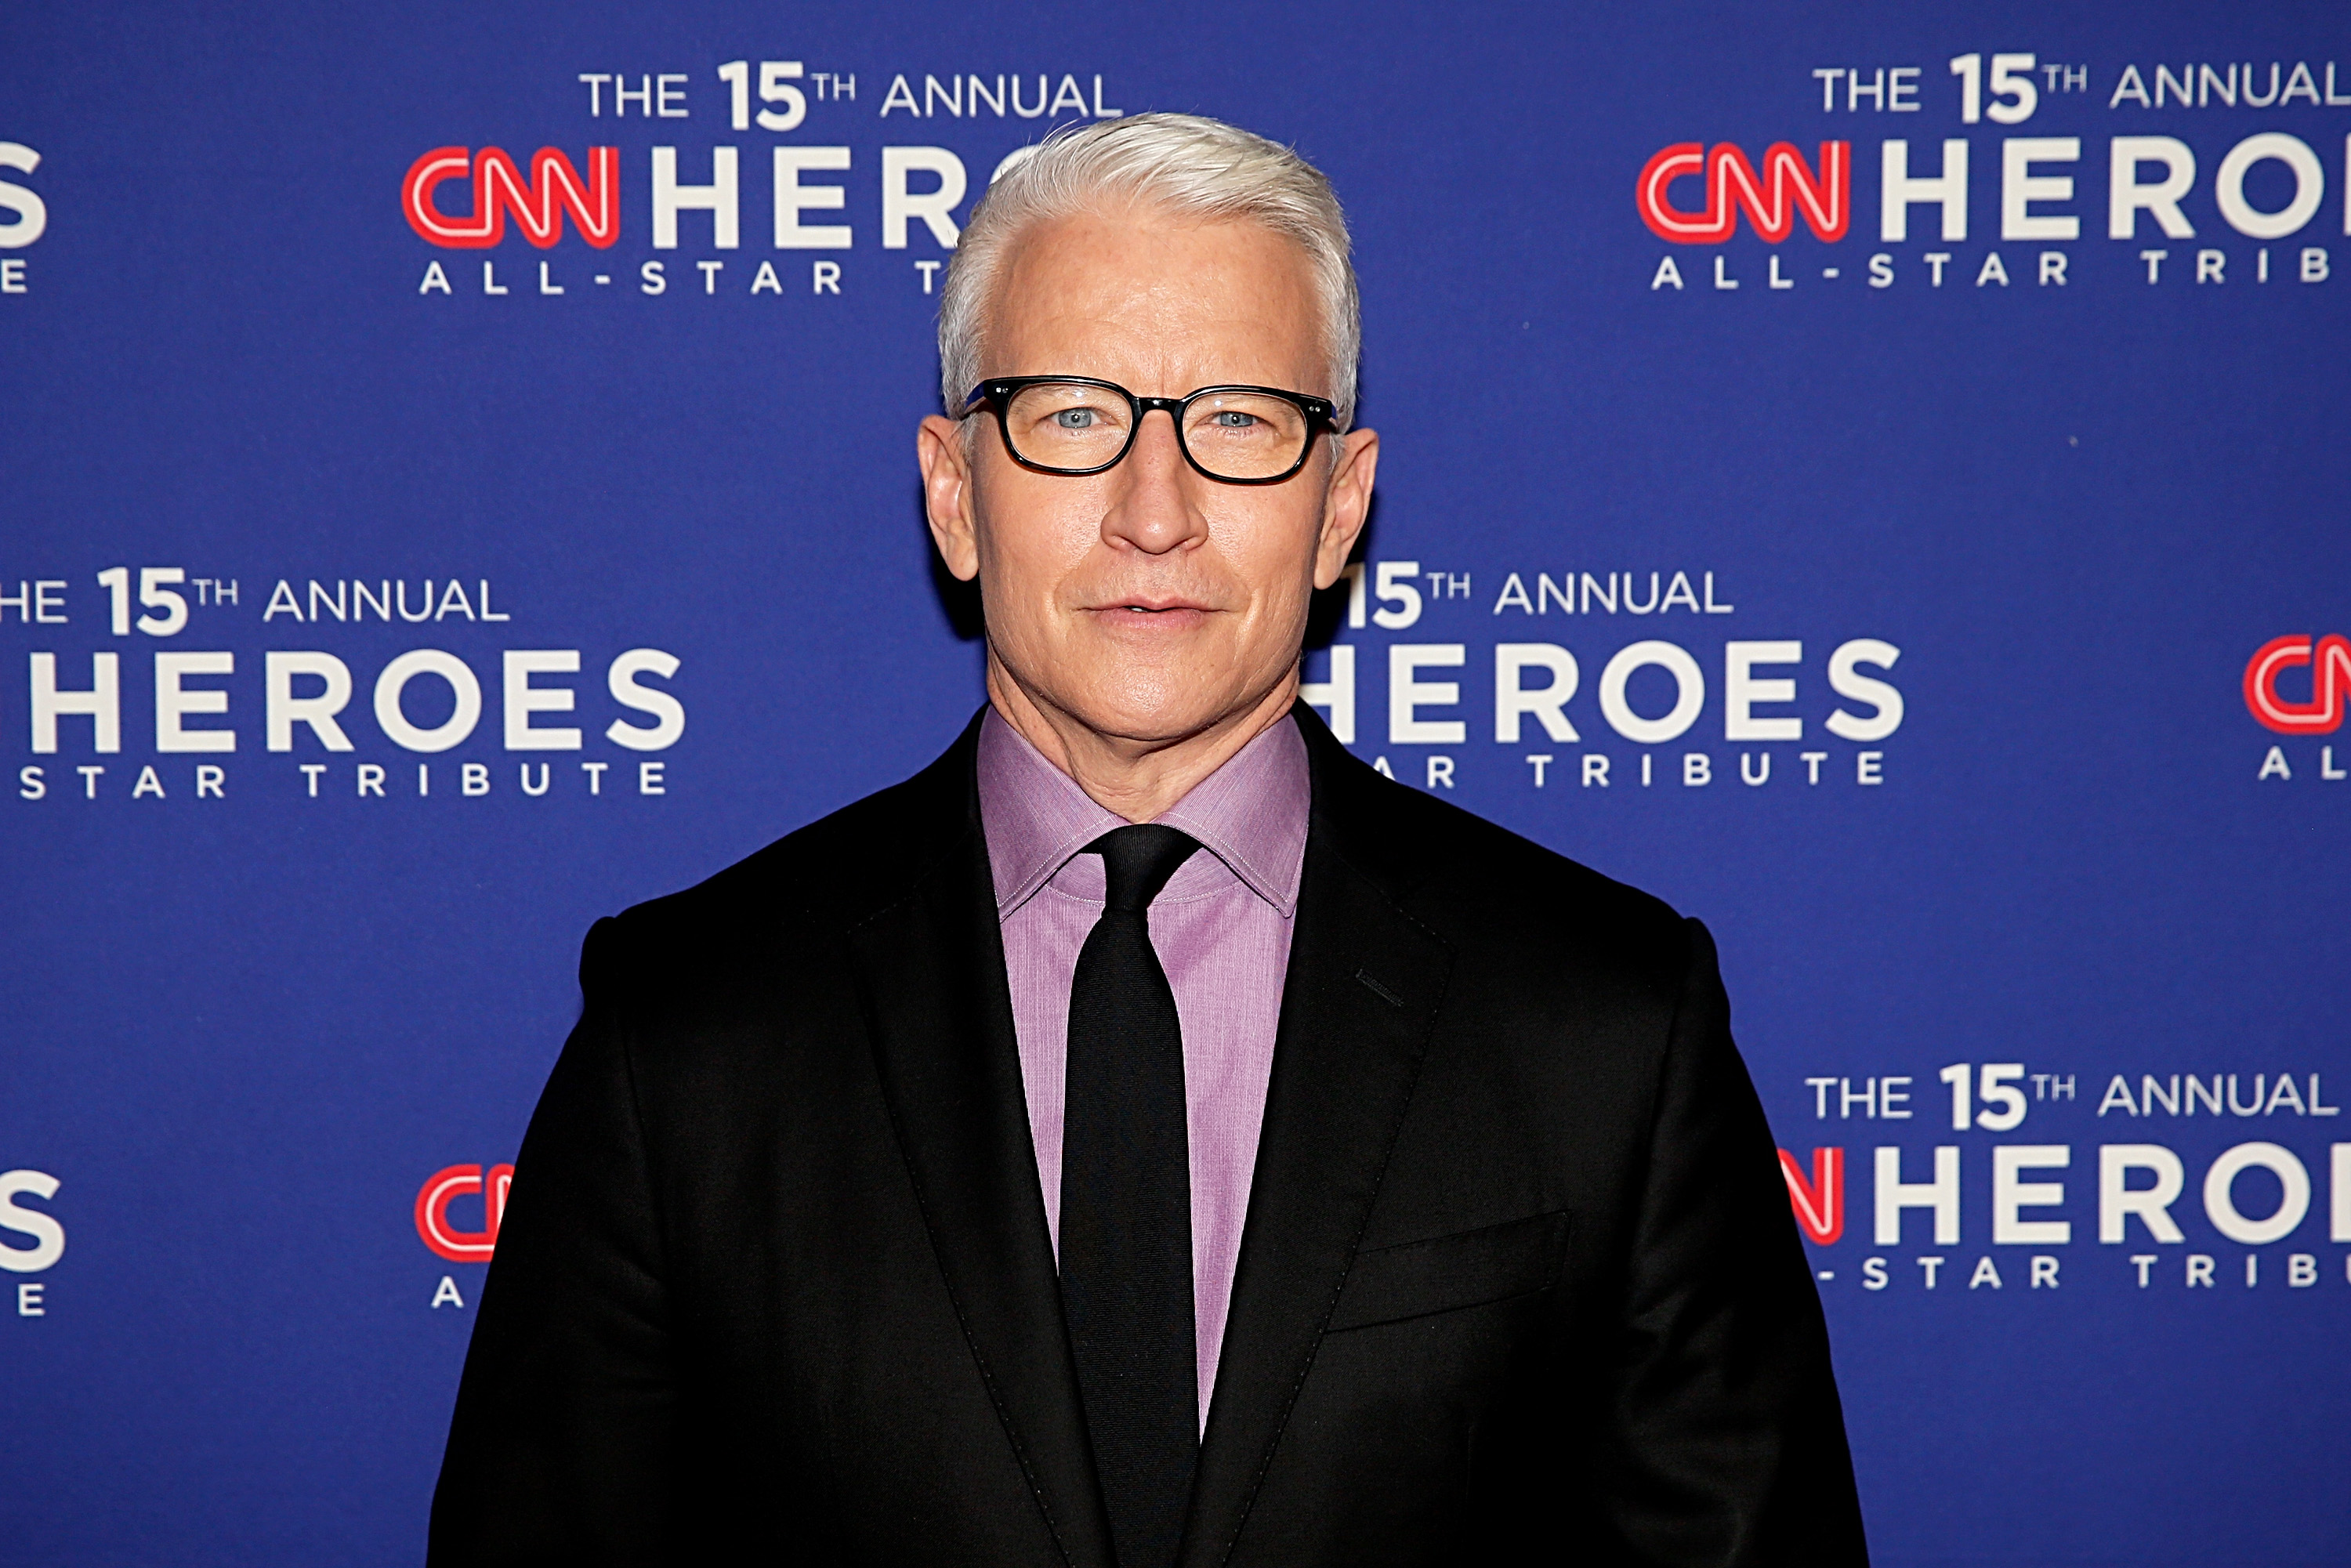 Anderson Cooper on December 12, 2021 in New York City. | Source: Getty Images